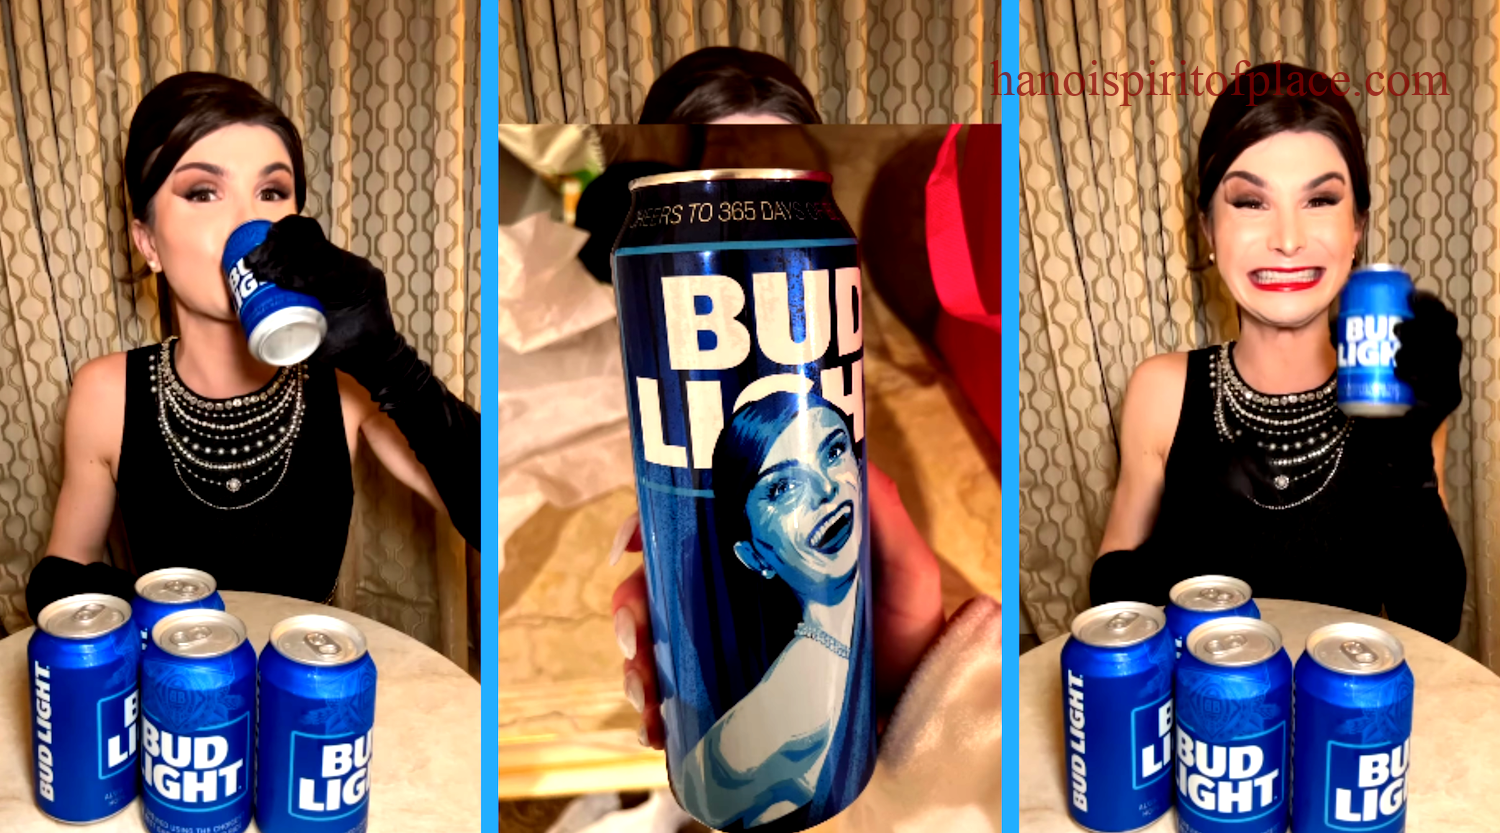 Explanation of the Bud Light Trans Video